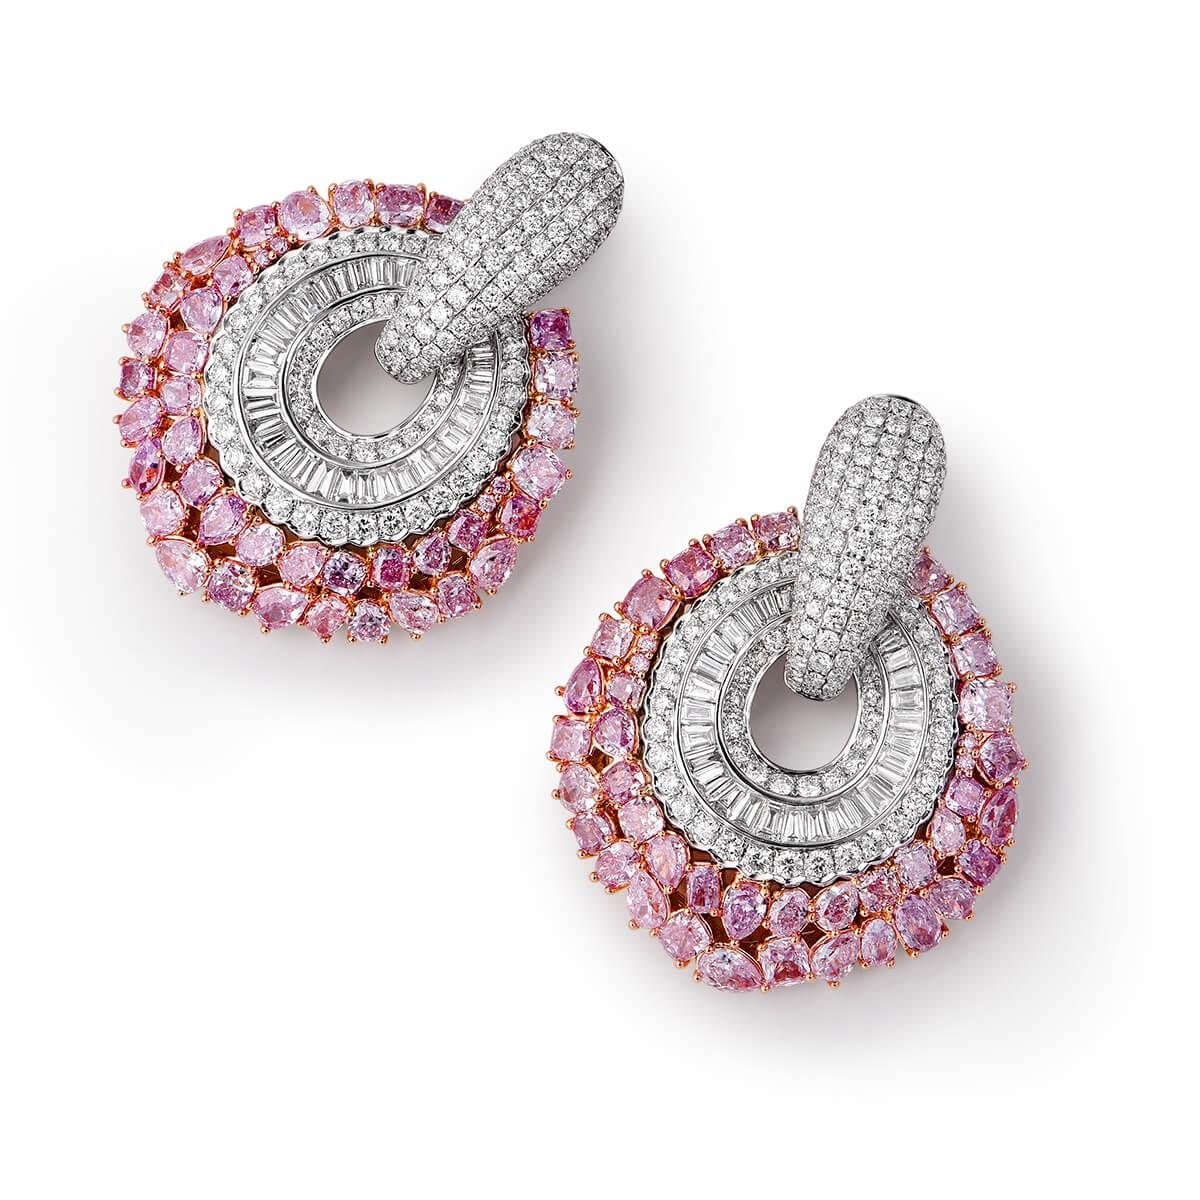 FANCY PINK DIAMOND EARRINGS - 14.46 CT


Set in 18KT White gold


Total pink diamond weight: 8.73 ct
[ 76 diamonds ]
Color: Fancy pink
Clarity: I1

Total tapered baguette white diamond weight: 2.53 ct
[ 61 diamonds ]
Color: G-H
Clarity: VS

Total